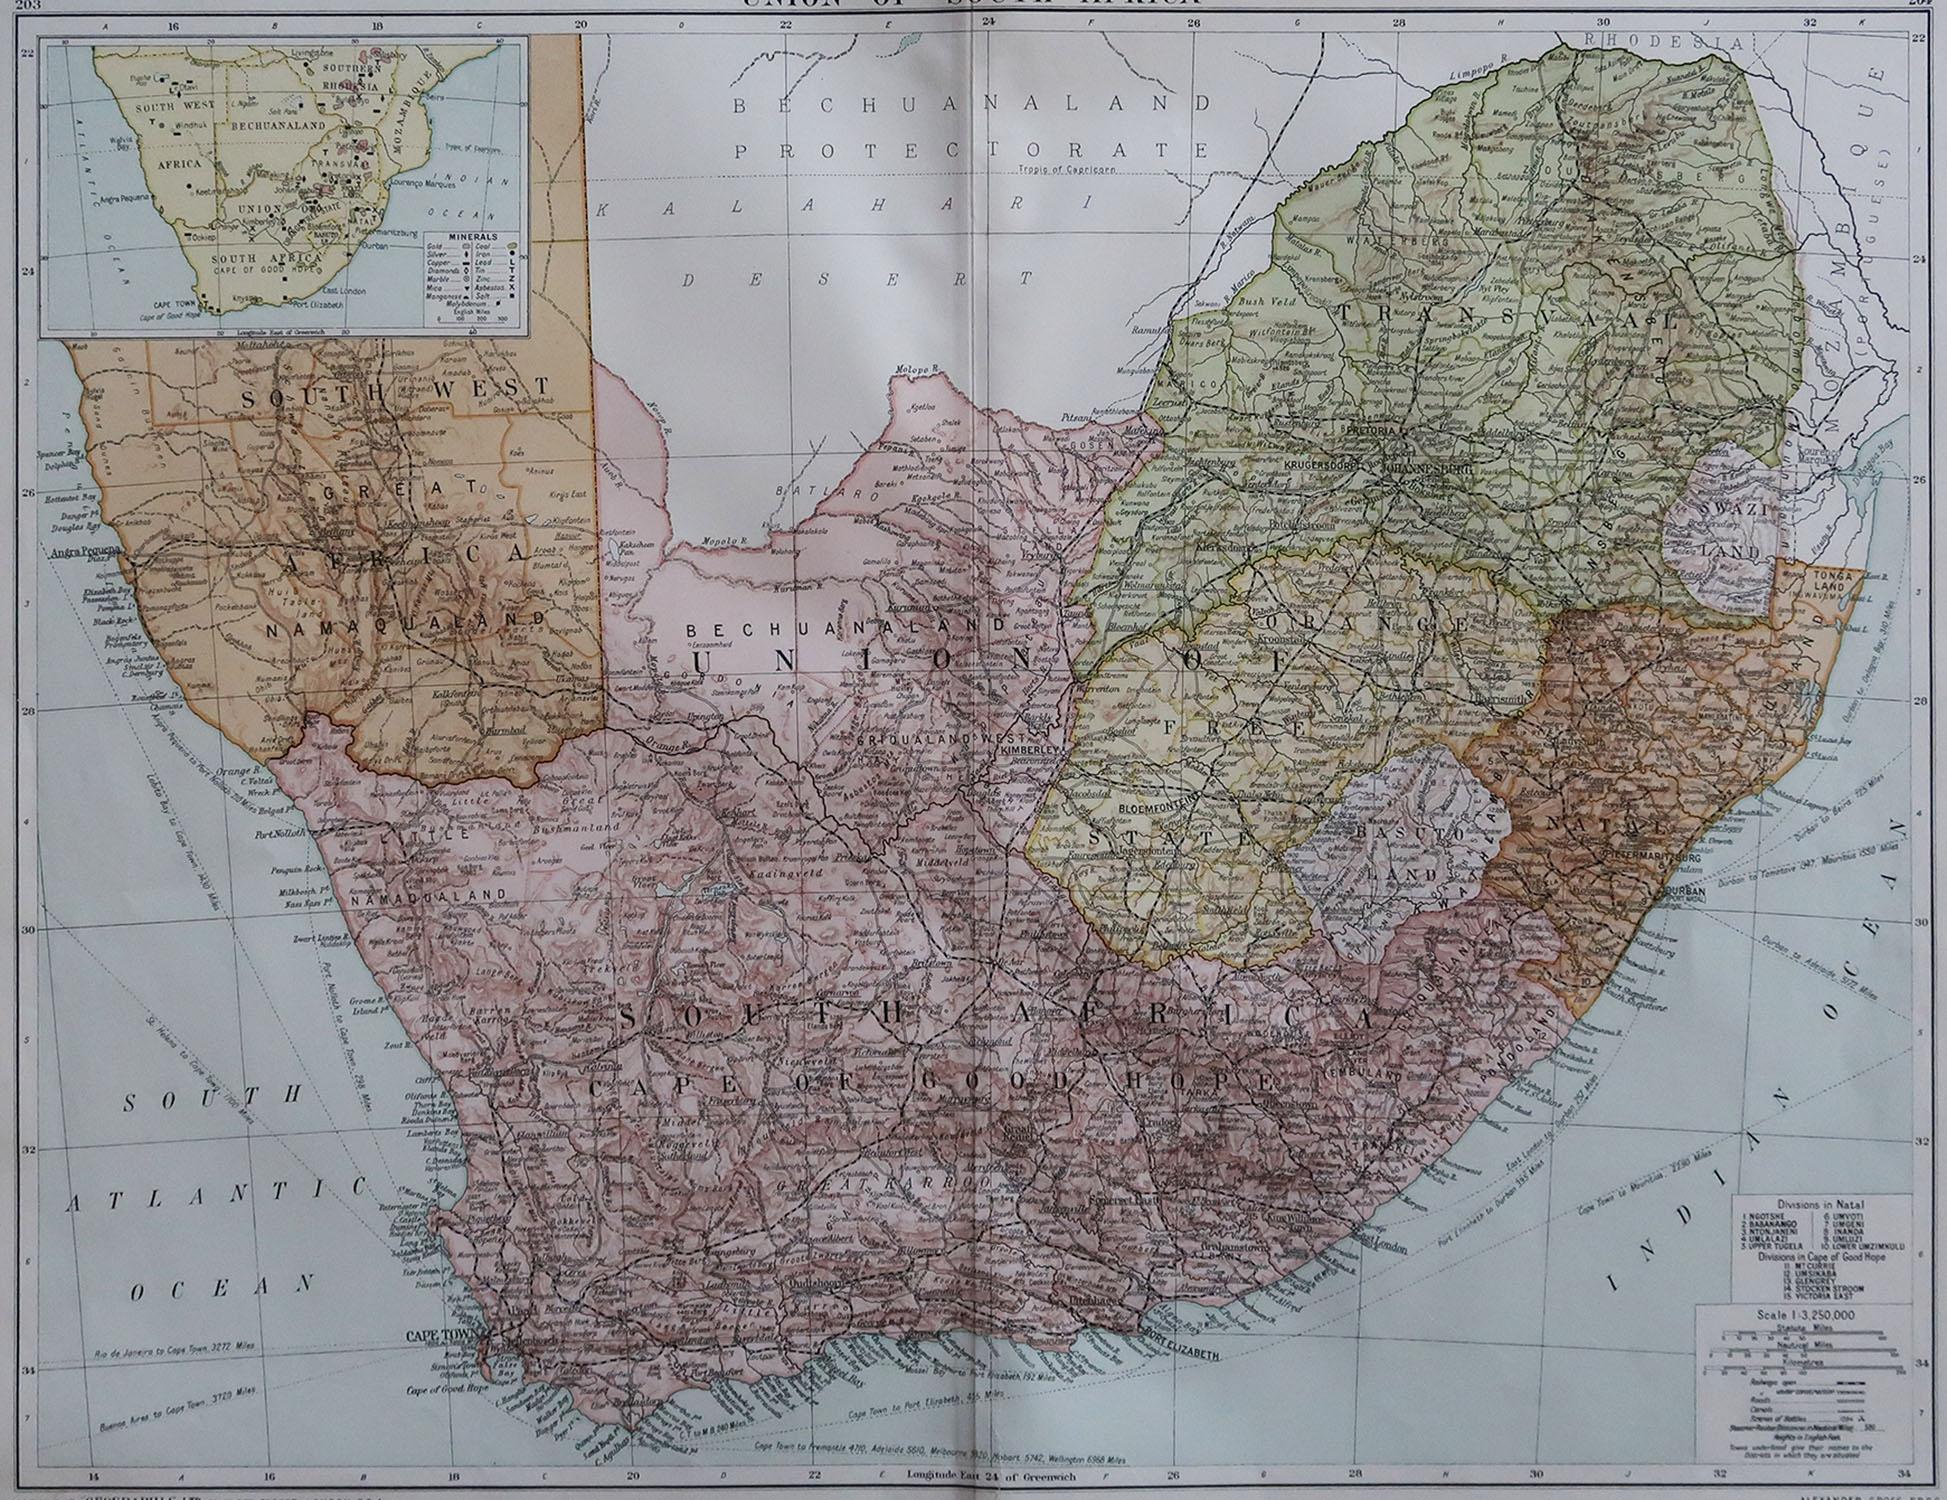 Great map of South Africa

Original color. 

Good condition / repair to a minor edge tear middle bottom

Published by Alexander Gross

Unframed.








